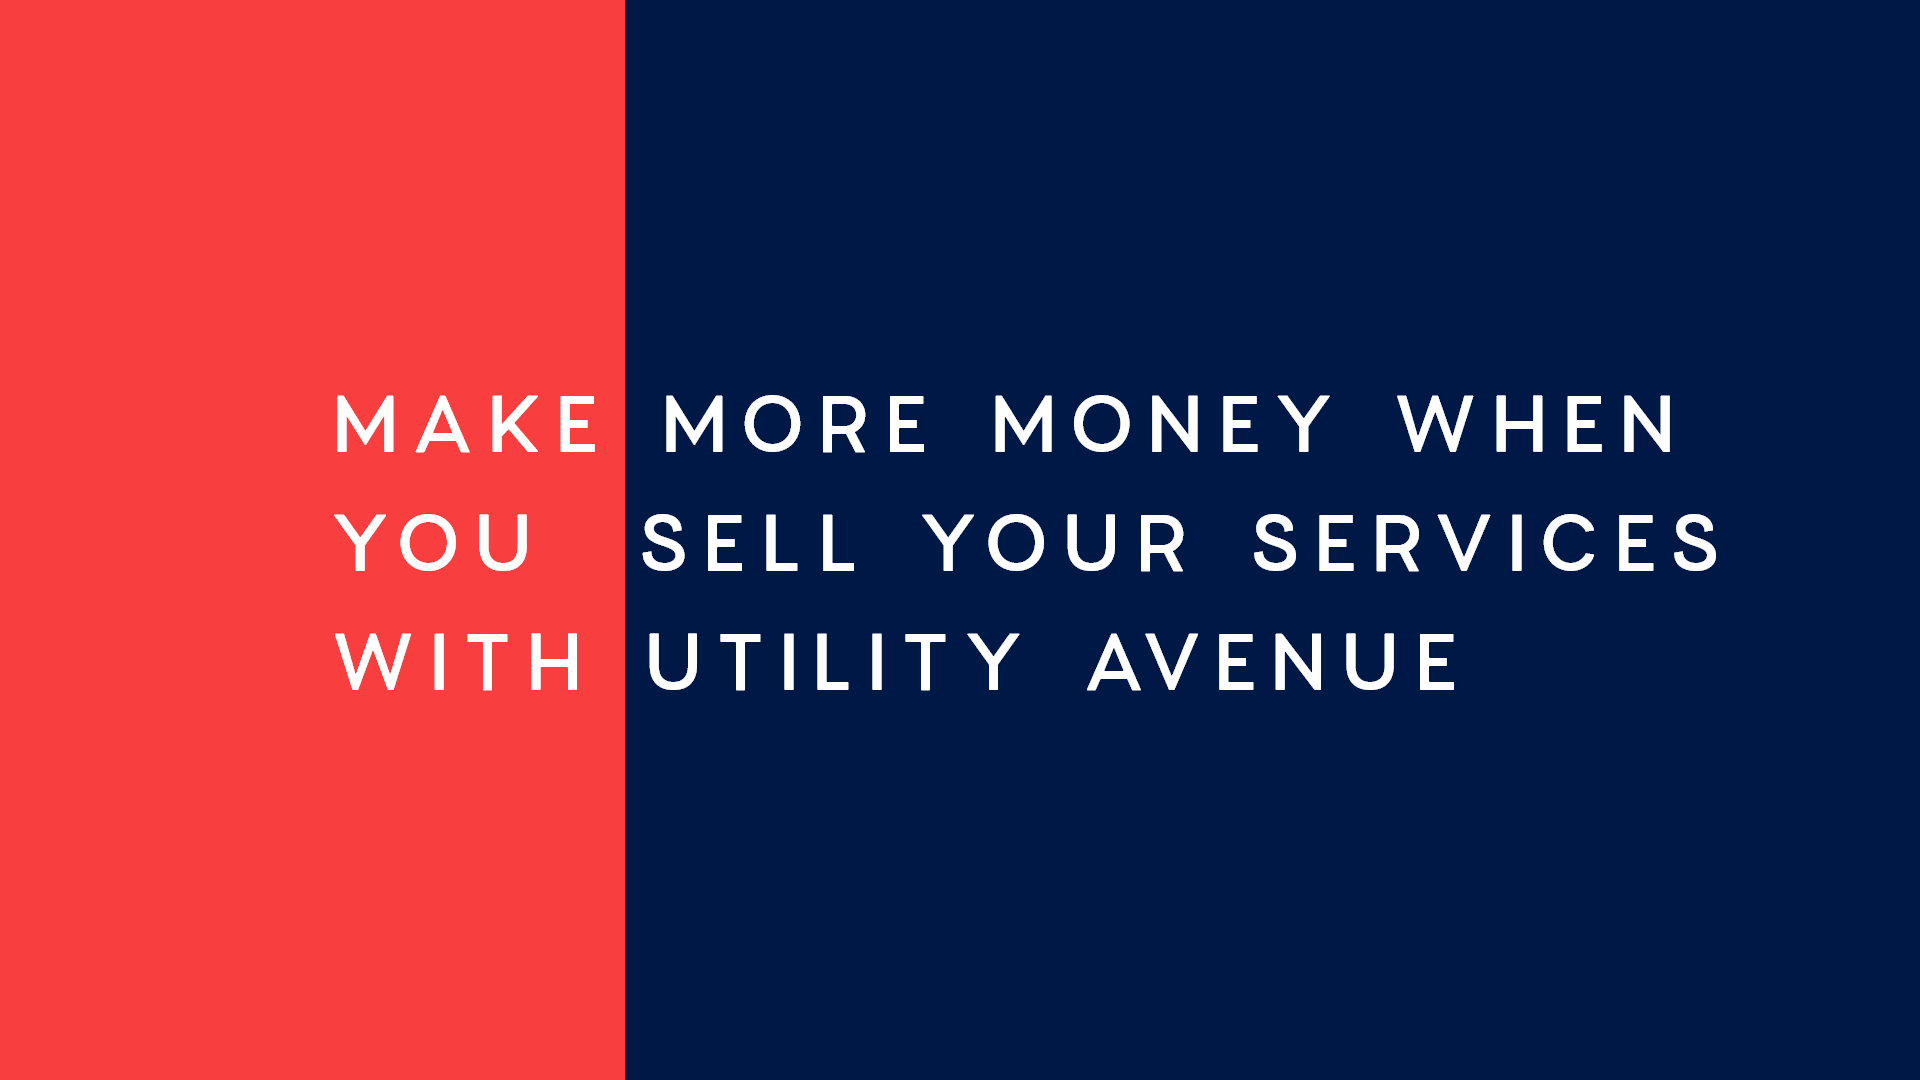 10 Reasons to Make Money with Utility Avenue